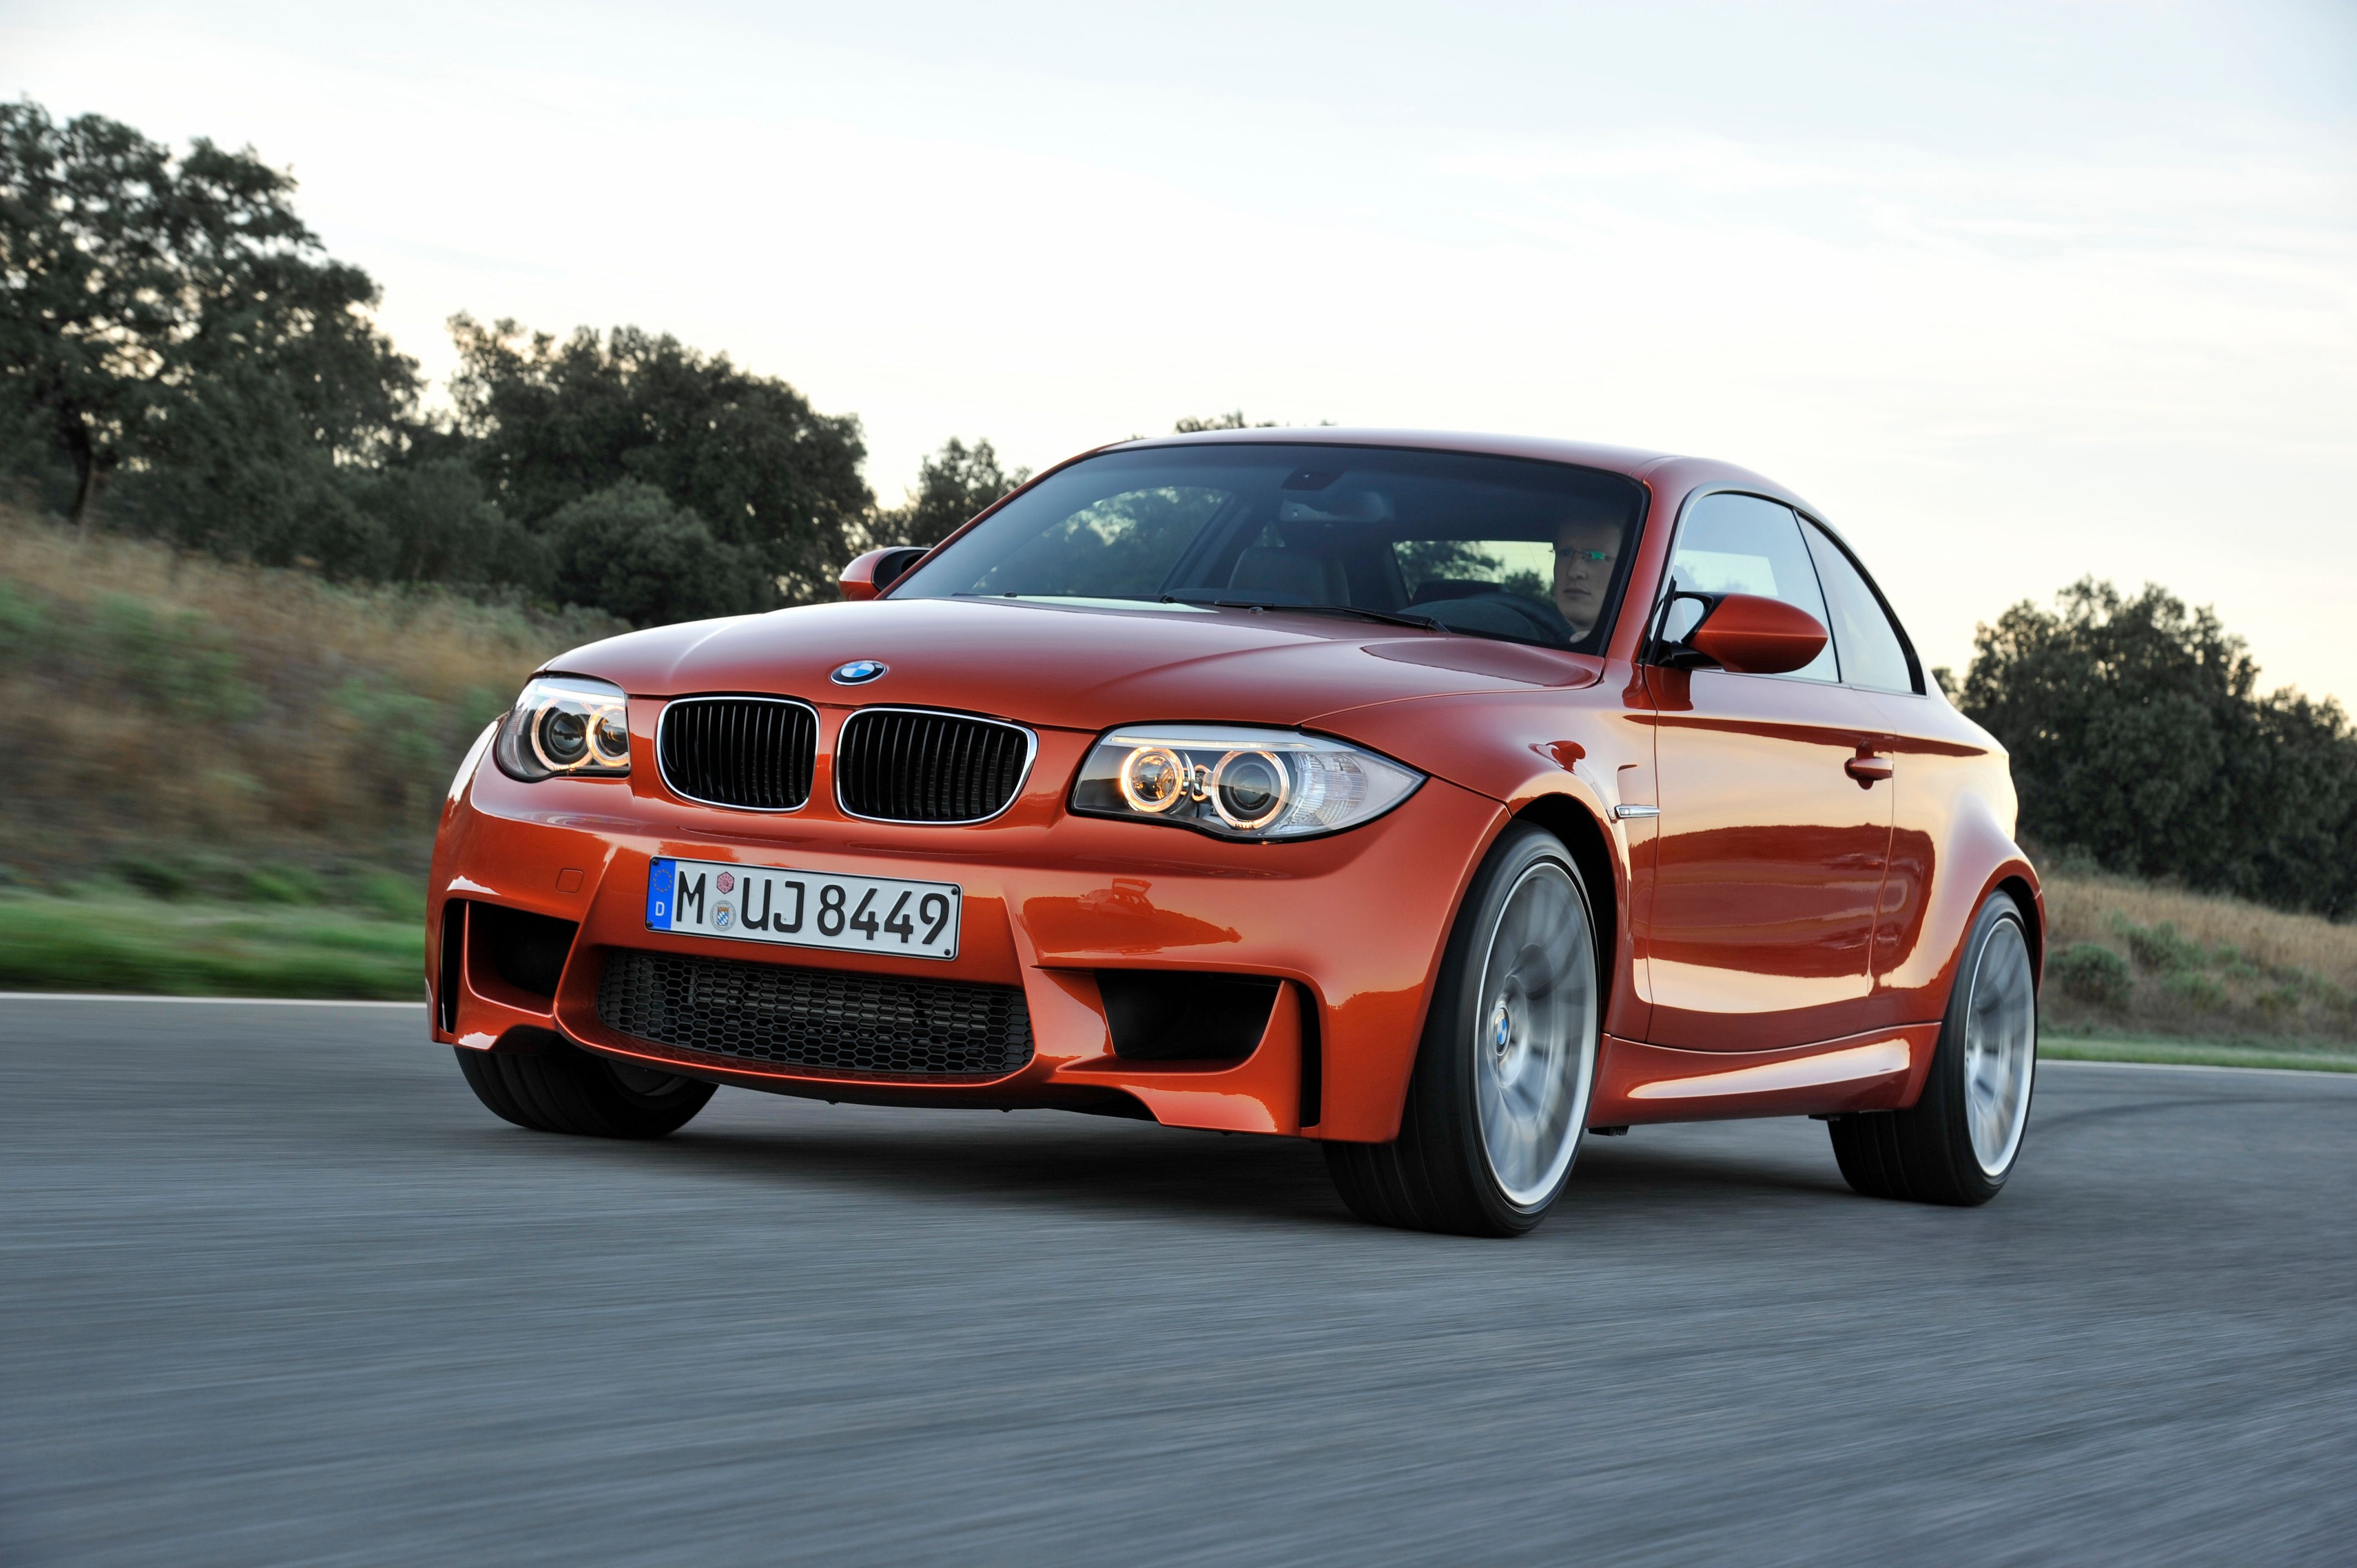 The BMW 1 Series M Coupe.